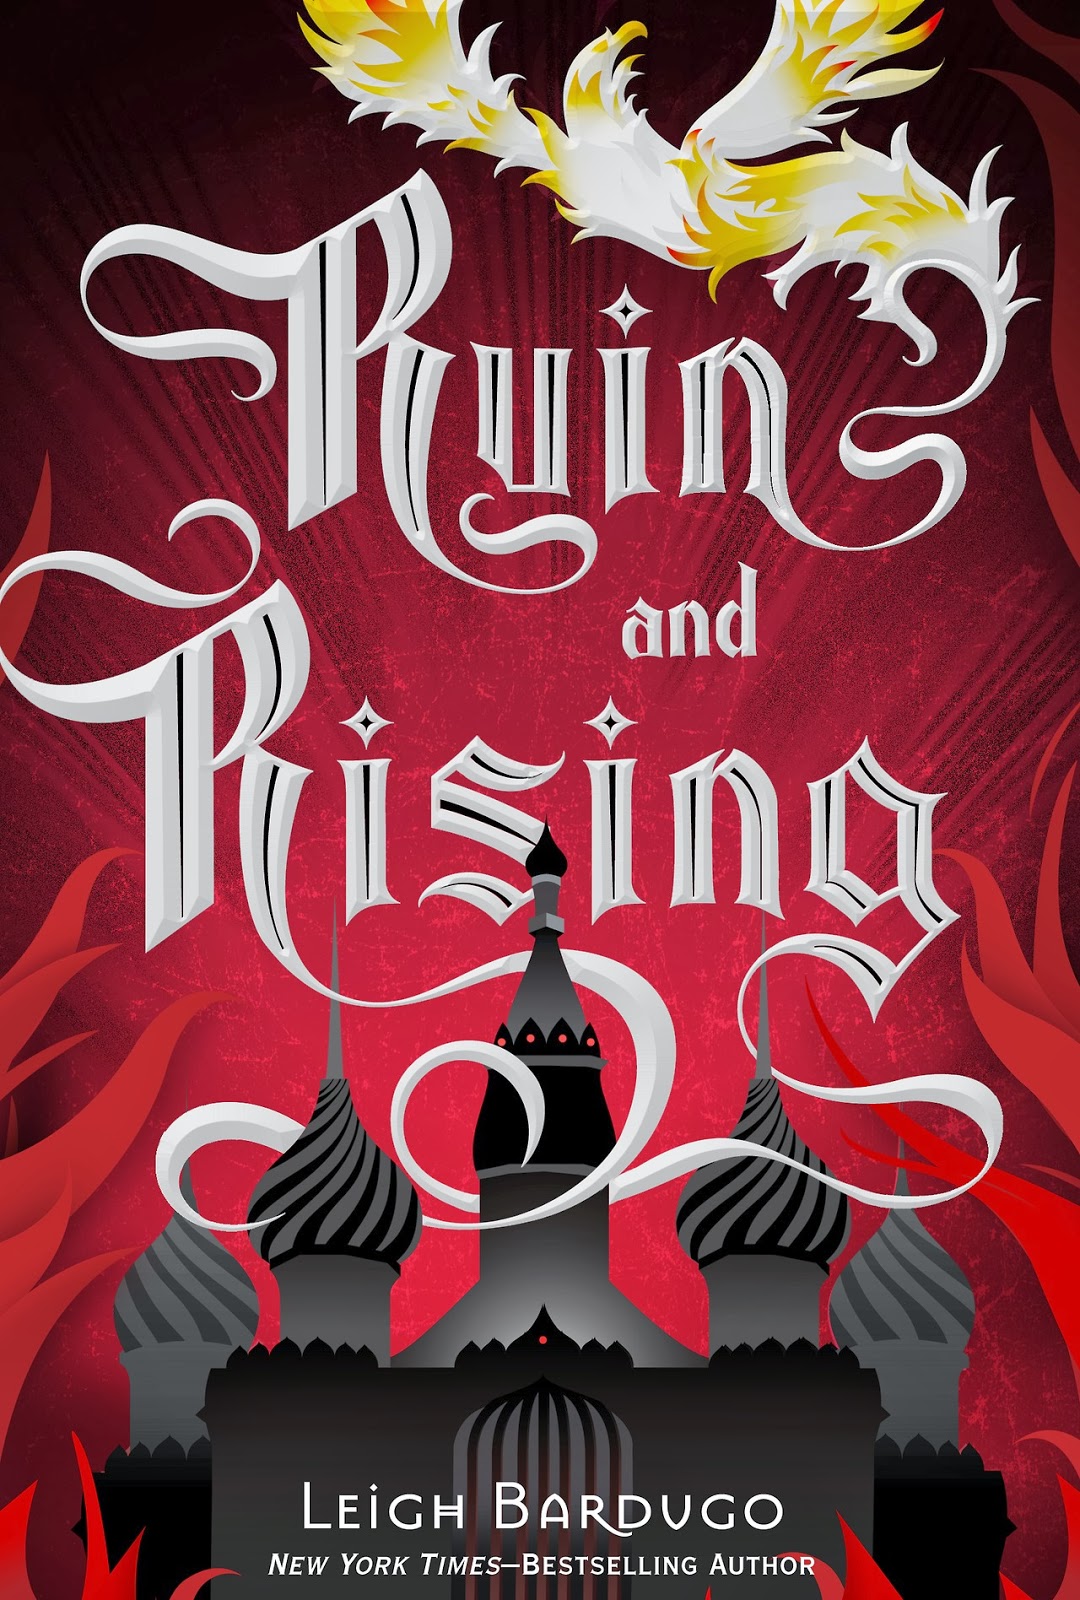 Cover of Ruin and Rising